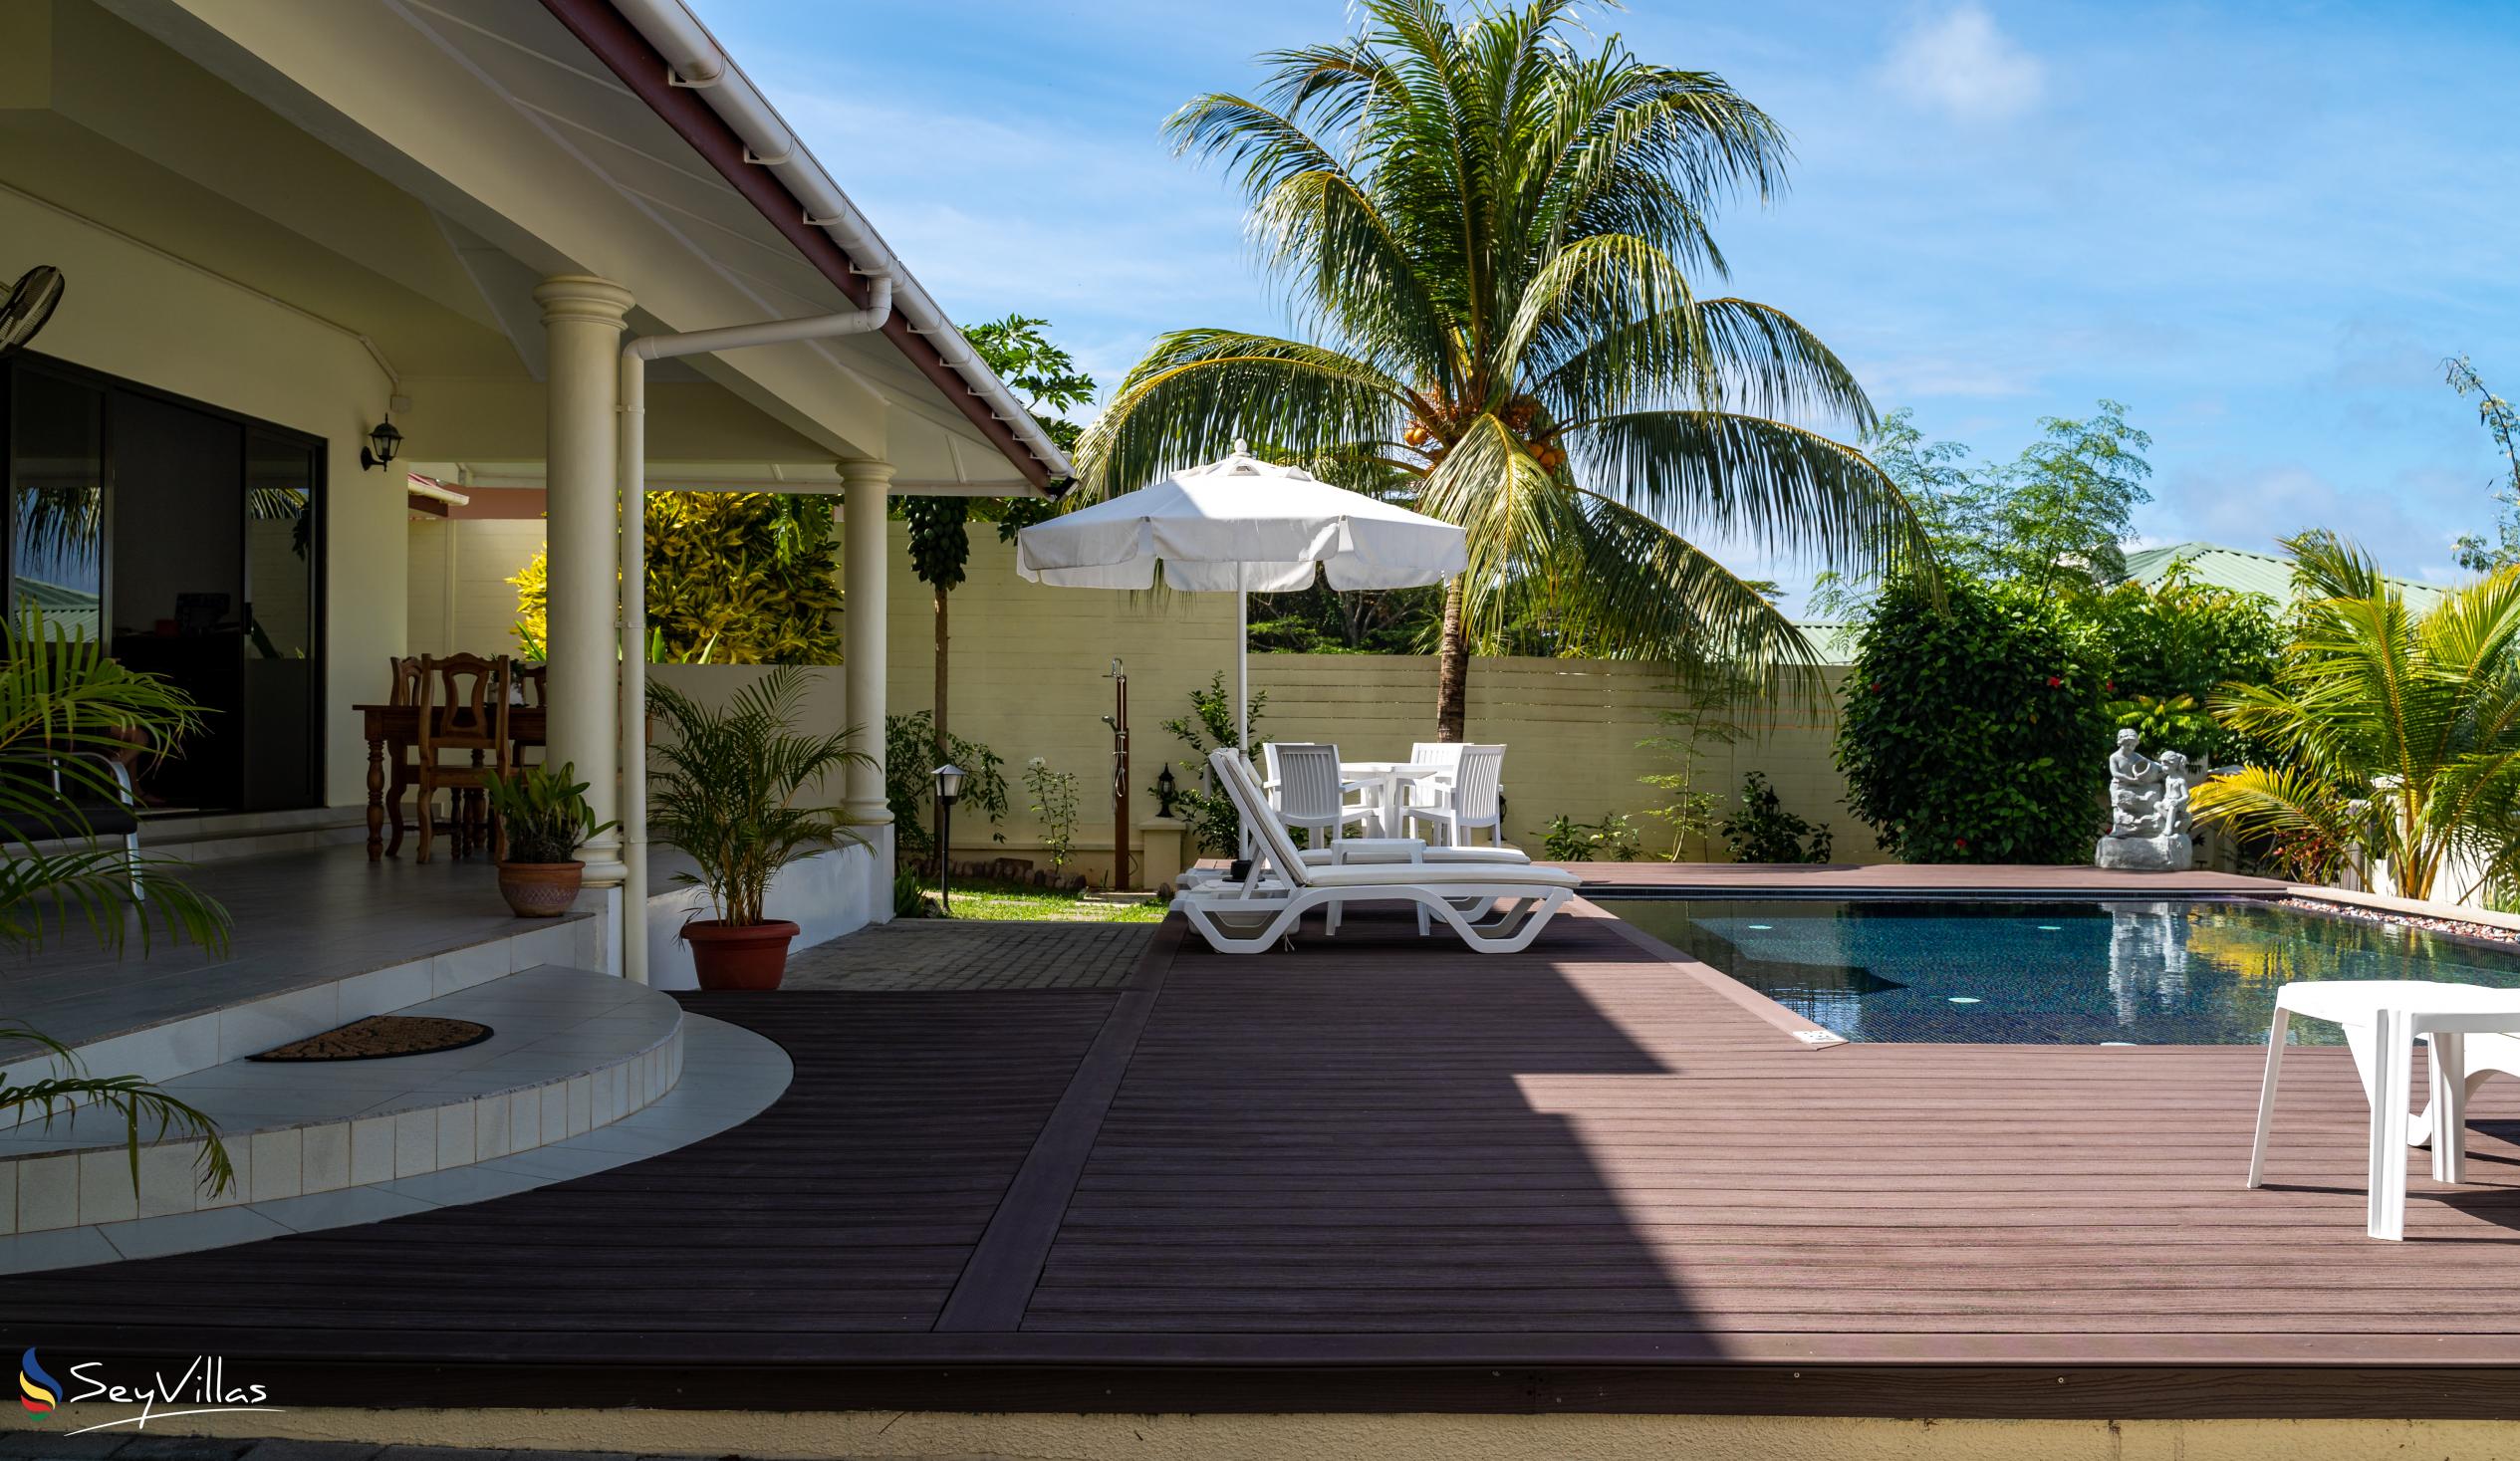 Photo 4: Emma's Guest House and Self-Catering - Outdoor area - Mahé (Seychelles)